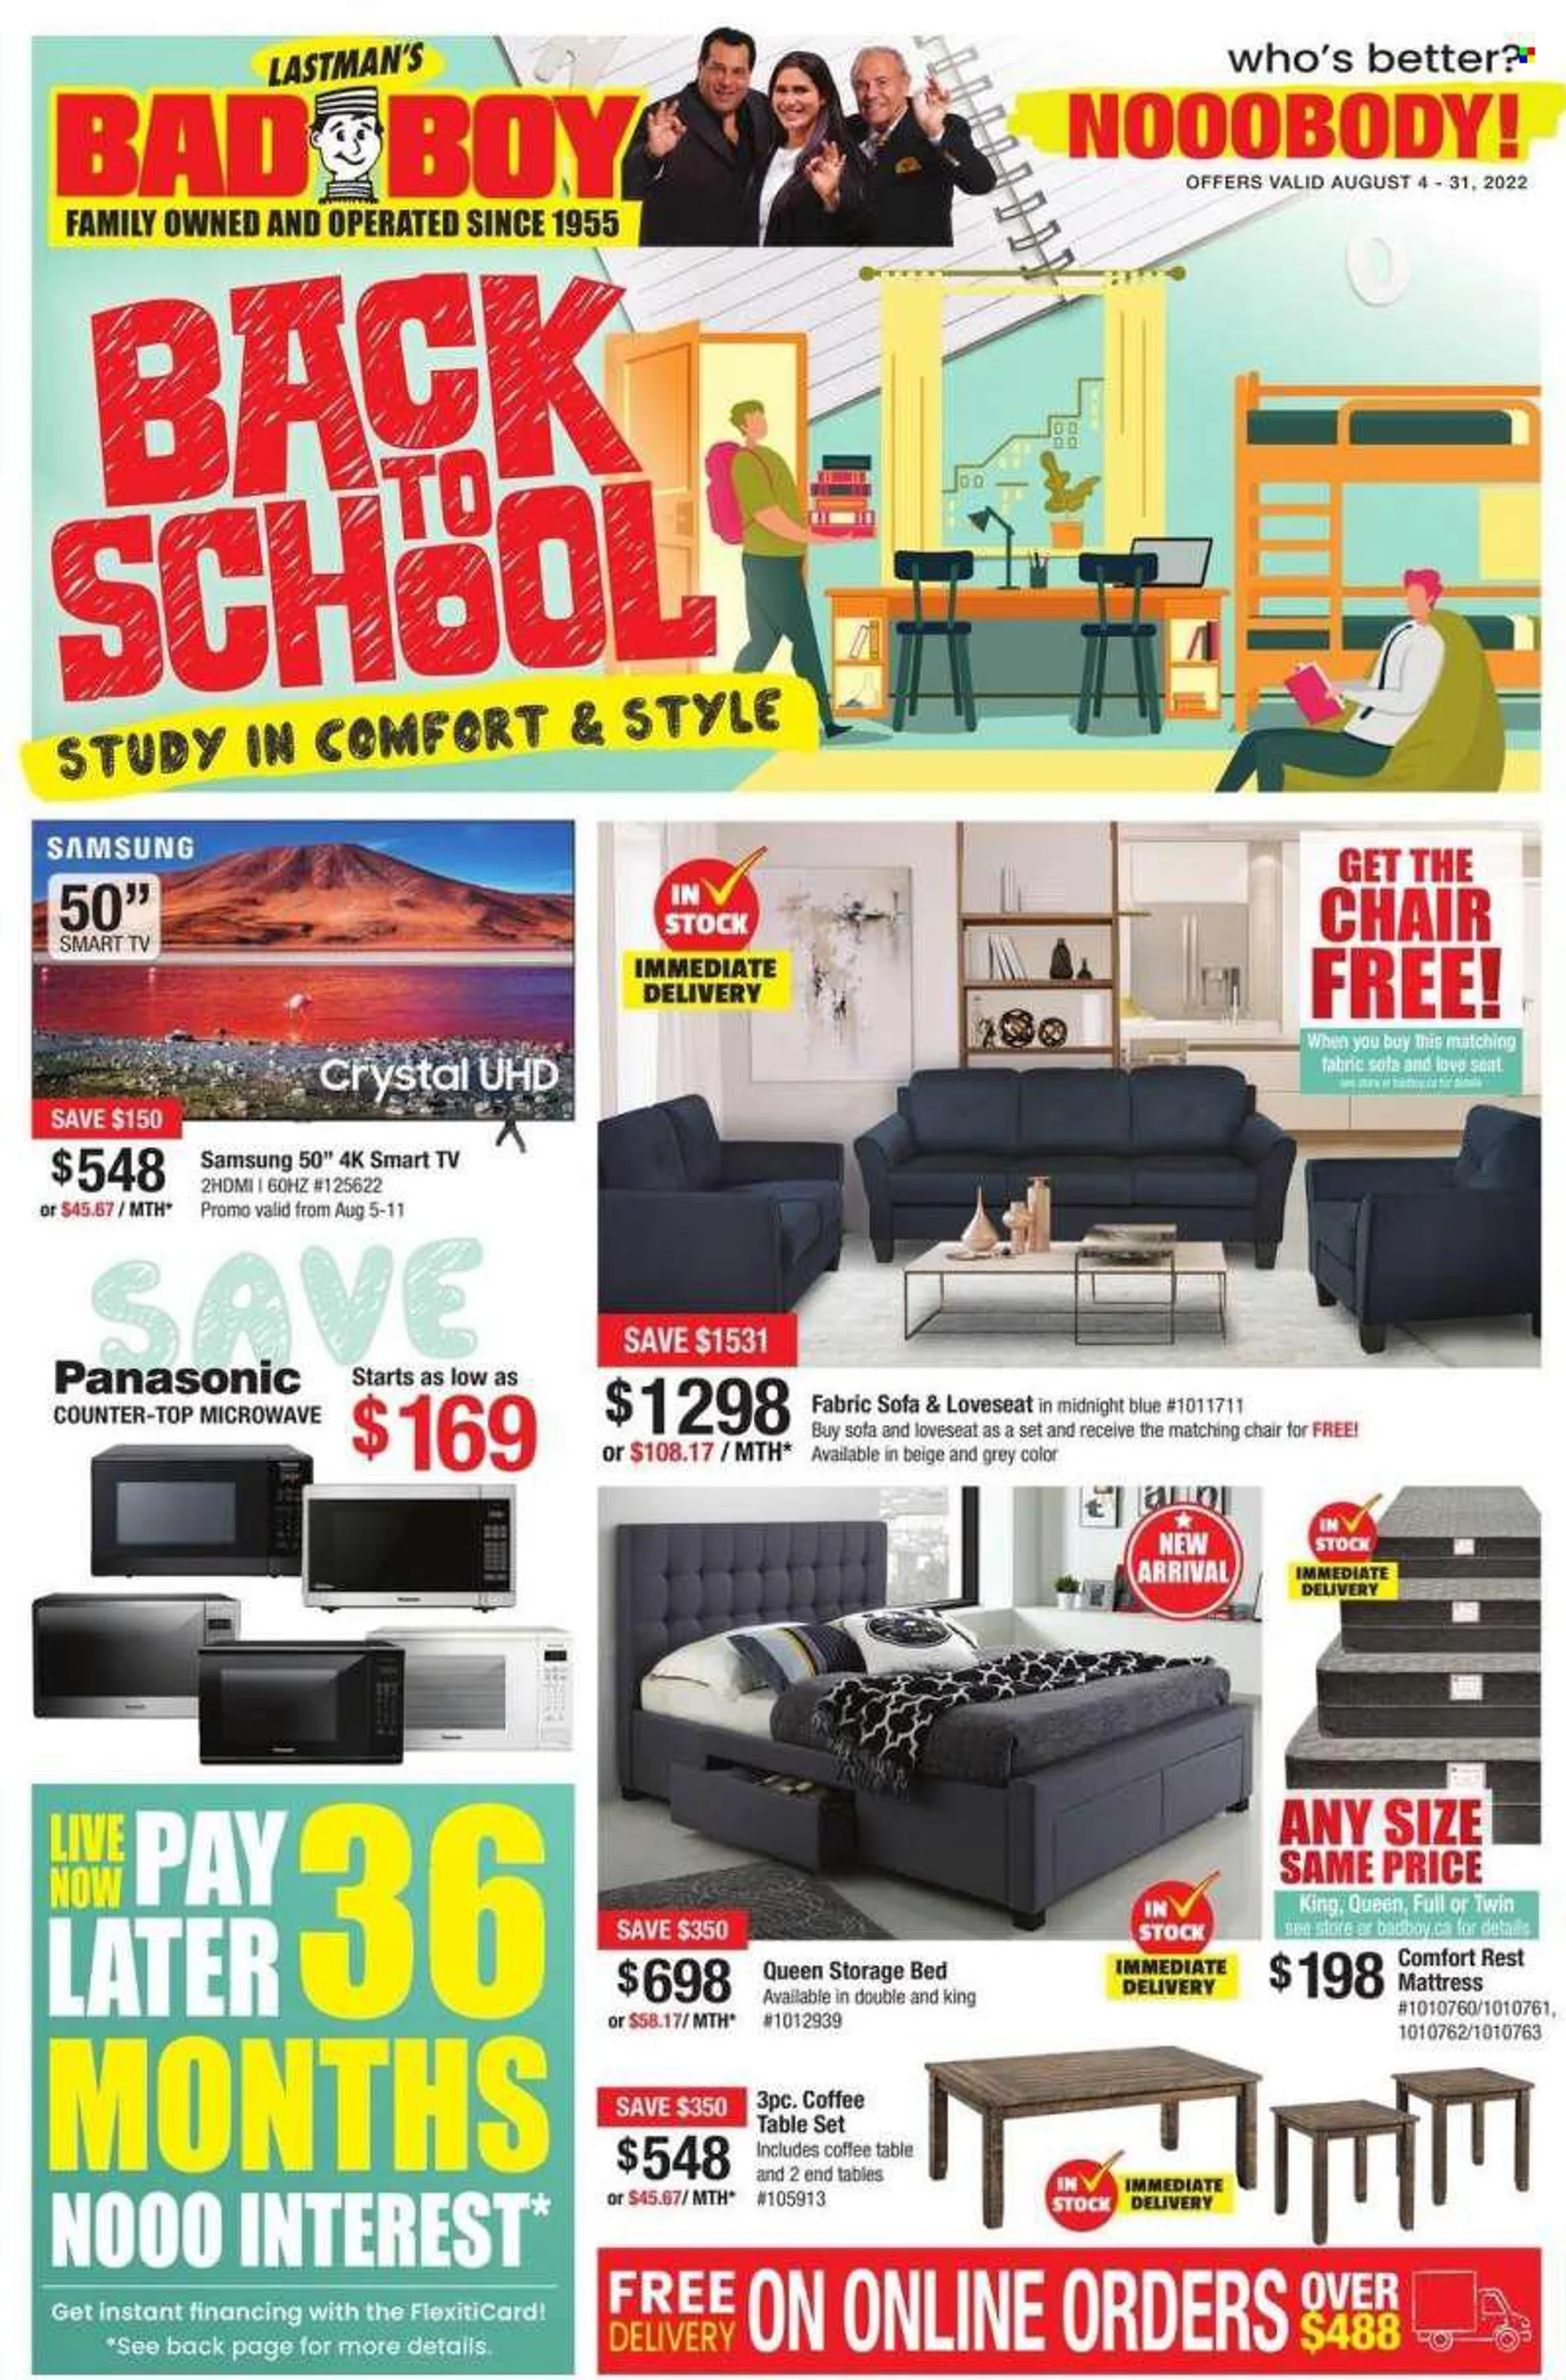 Bad Boy Superstore Flyer - August 04, 2022 - August 31, 2022 - Sales products - chair, Samsung, TV, microwave oven, table, table set, loveseat, sofa, coffee table, end table, storage bed, mattress, smart tv, Panasonic. Page 1.